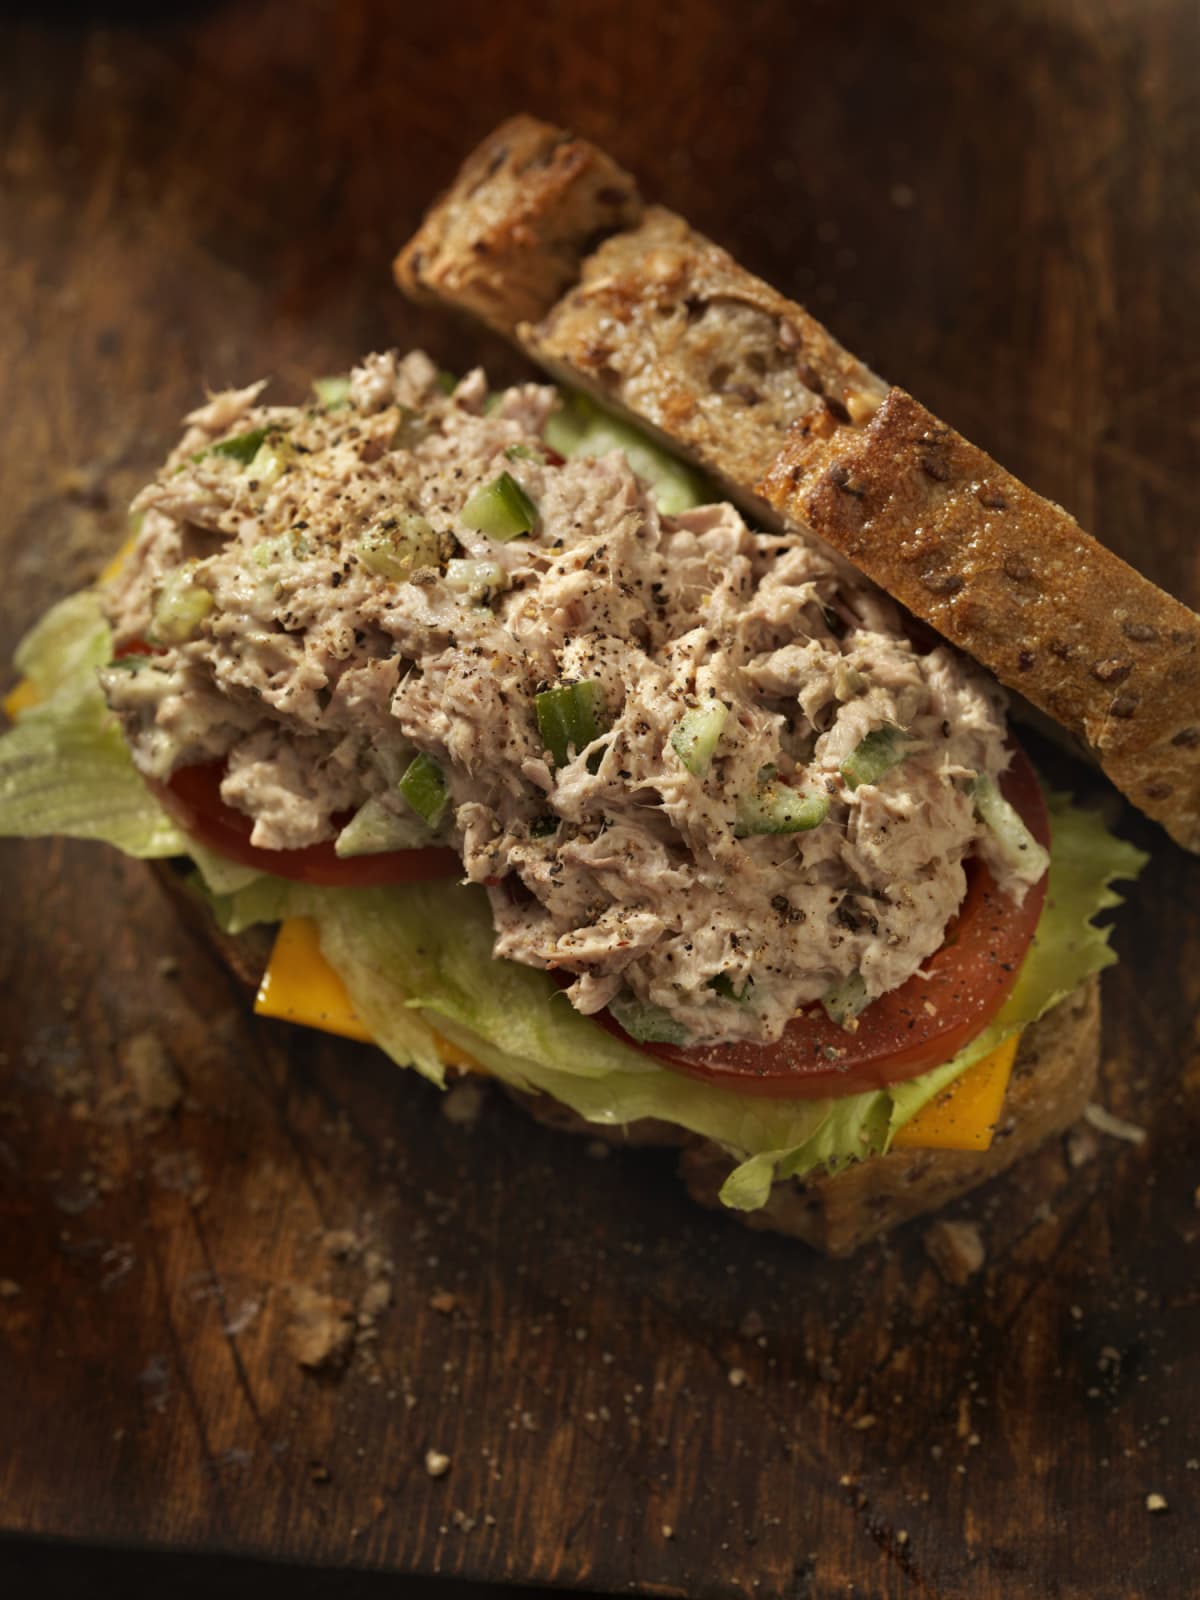 A tuna salad on a bed of green salad with tomatoes